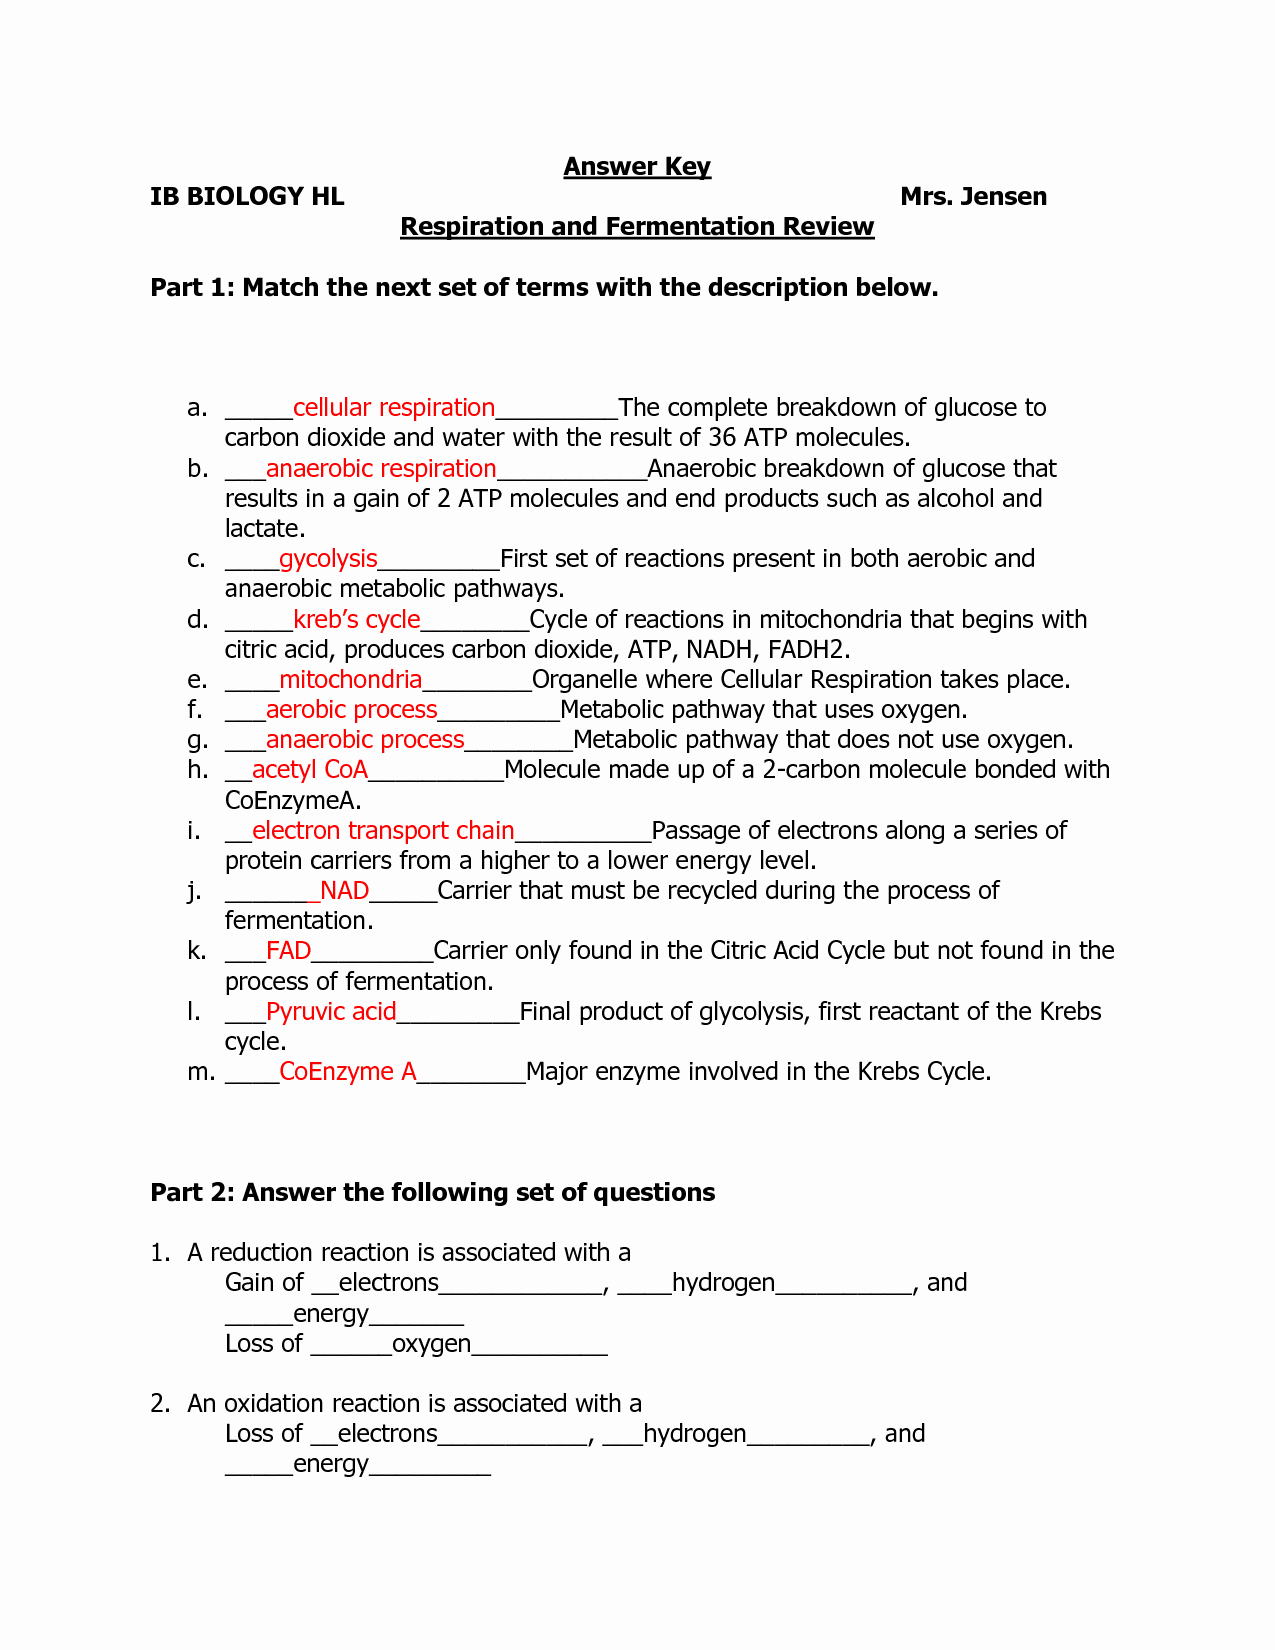 Cell Cycle Worksheet Answer Key Lovely 18 Best Of Cell Cycle Review Worksheet Answers